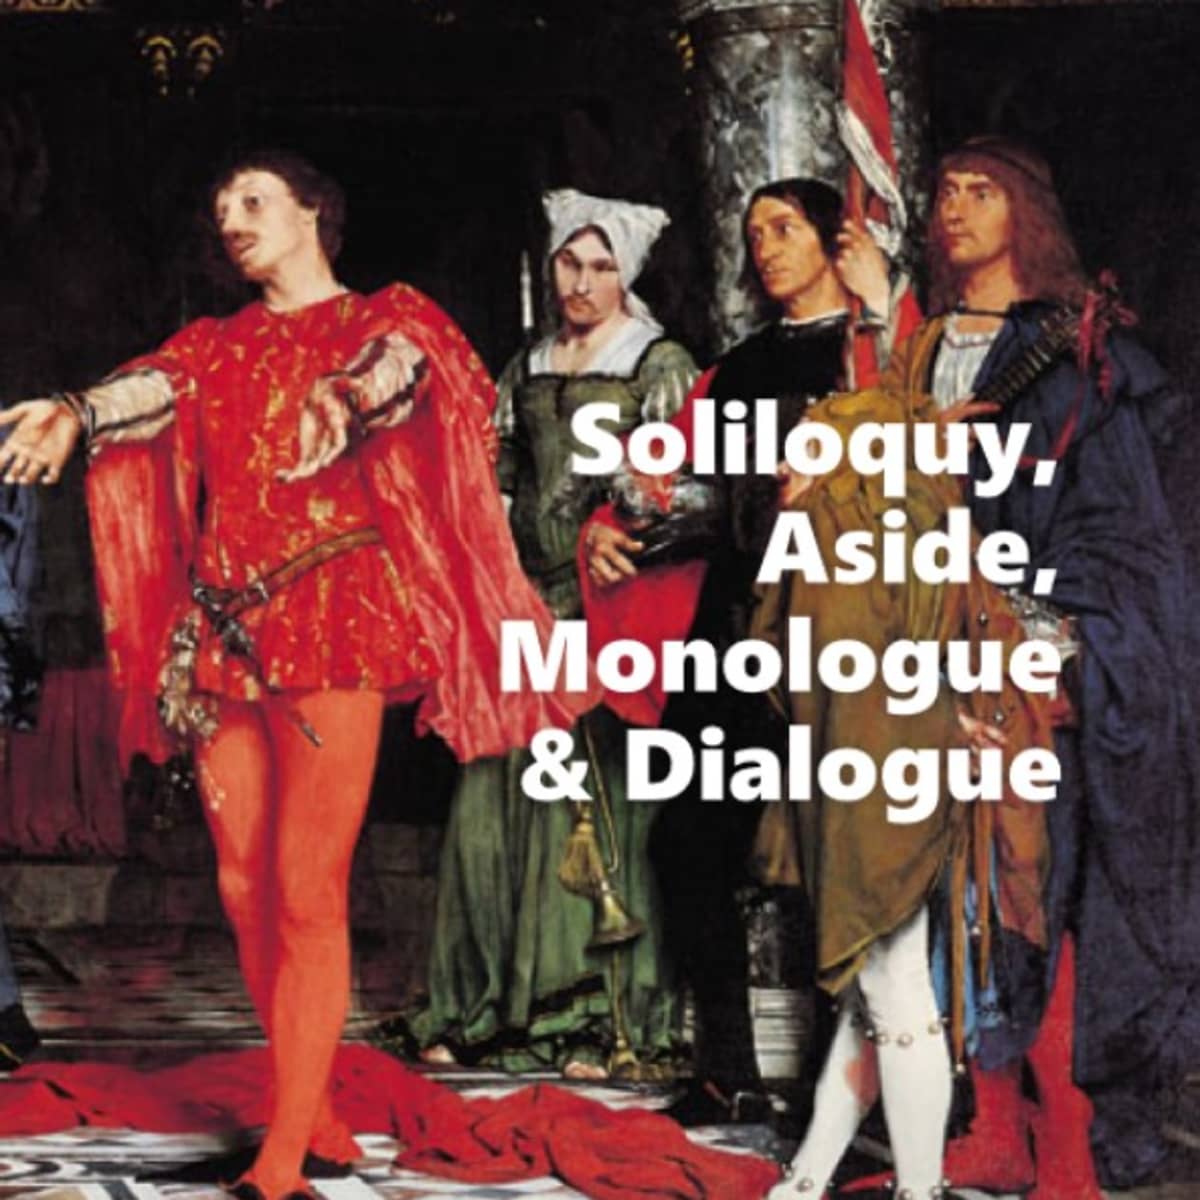 Soliloquy, Aside, Monologue, and Dialogue in Shakespeare: How to